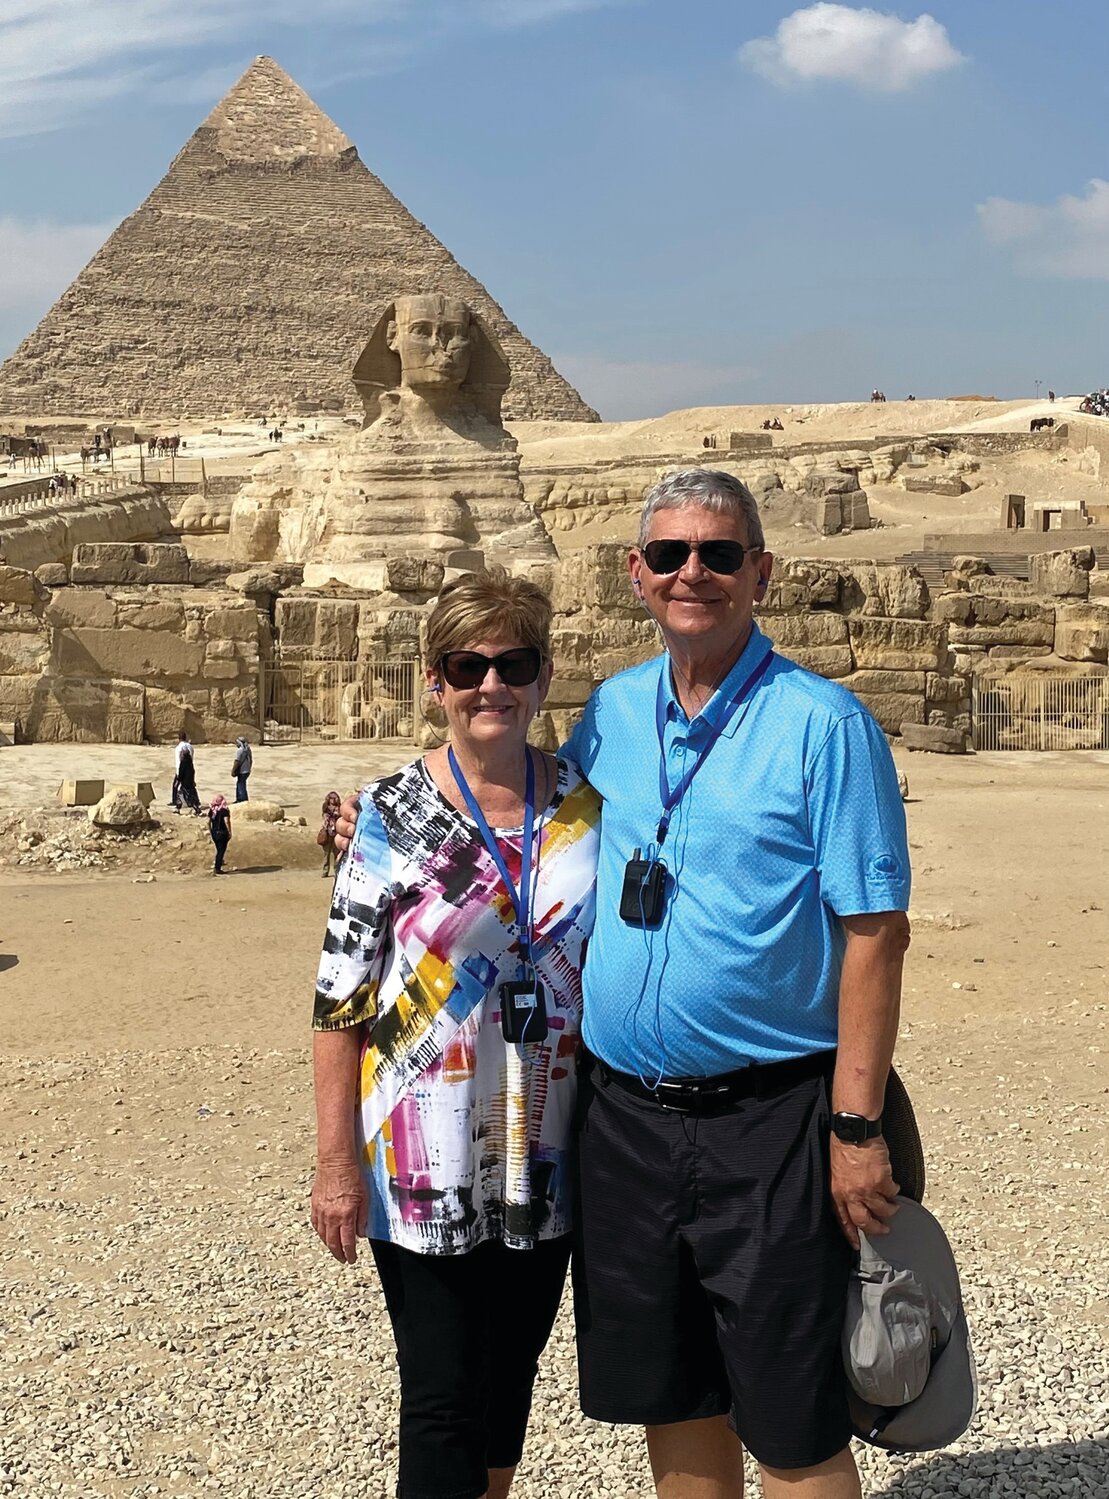 Tom and Jan Stegmann visit one of their favorite travel destinations in Egypt. (Submitted photo)